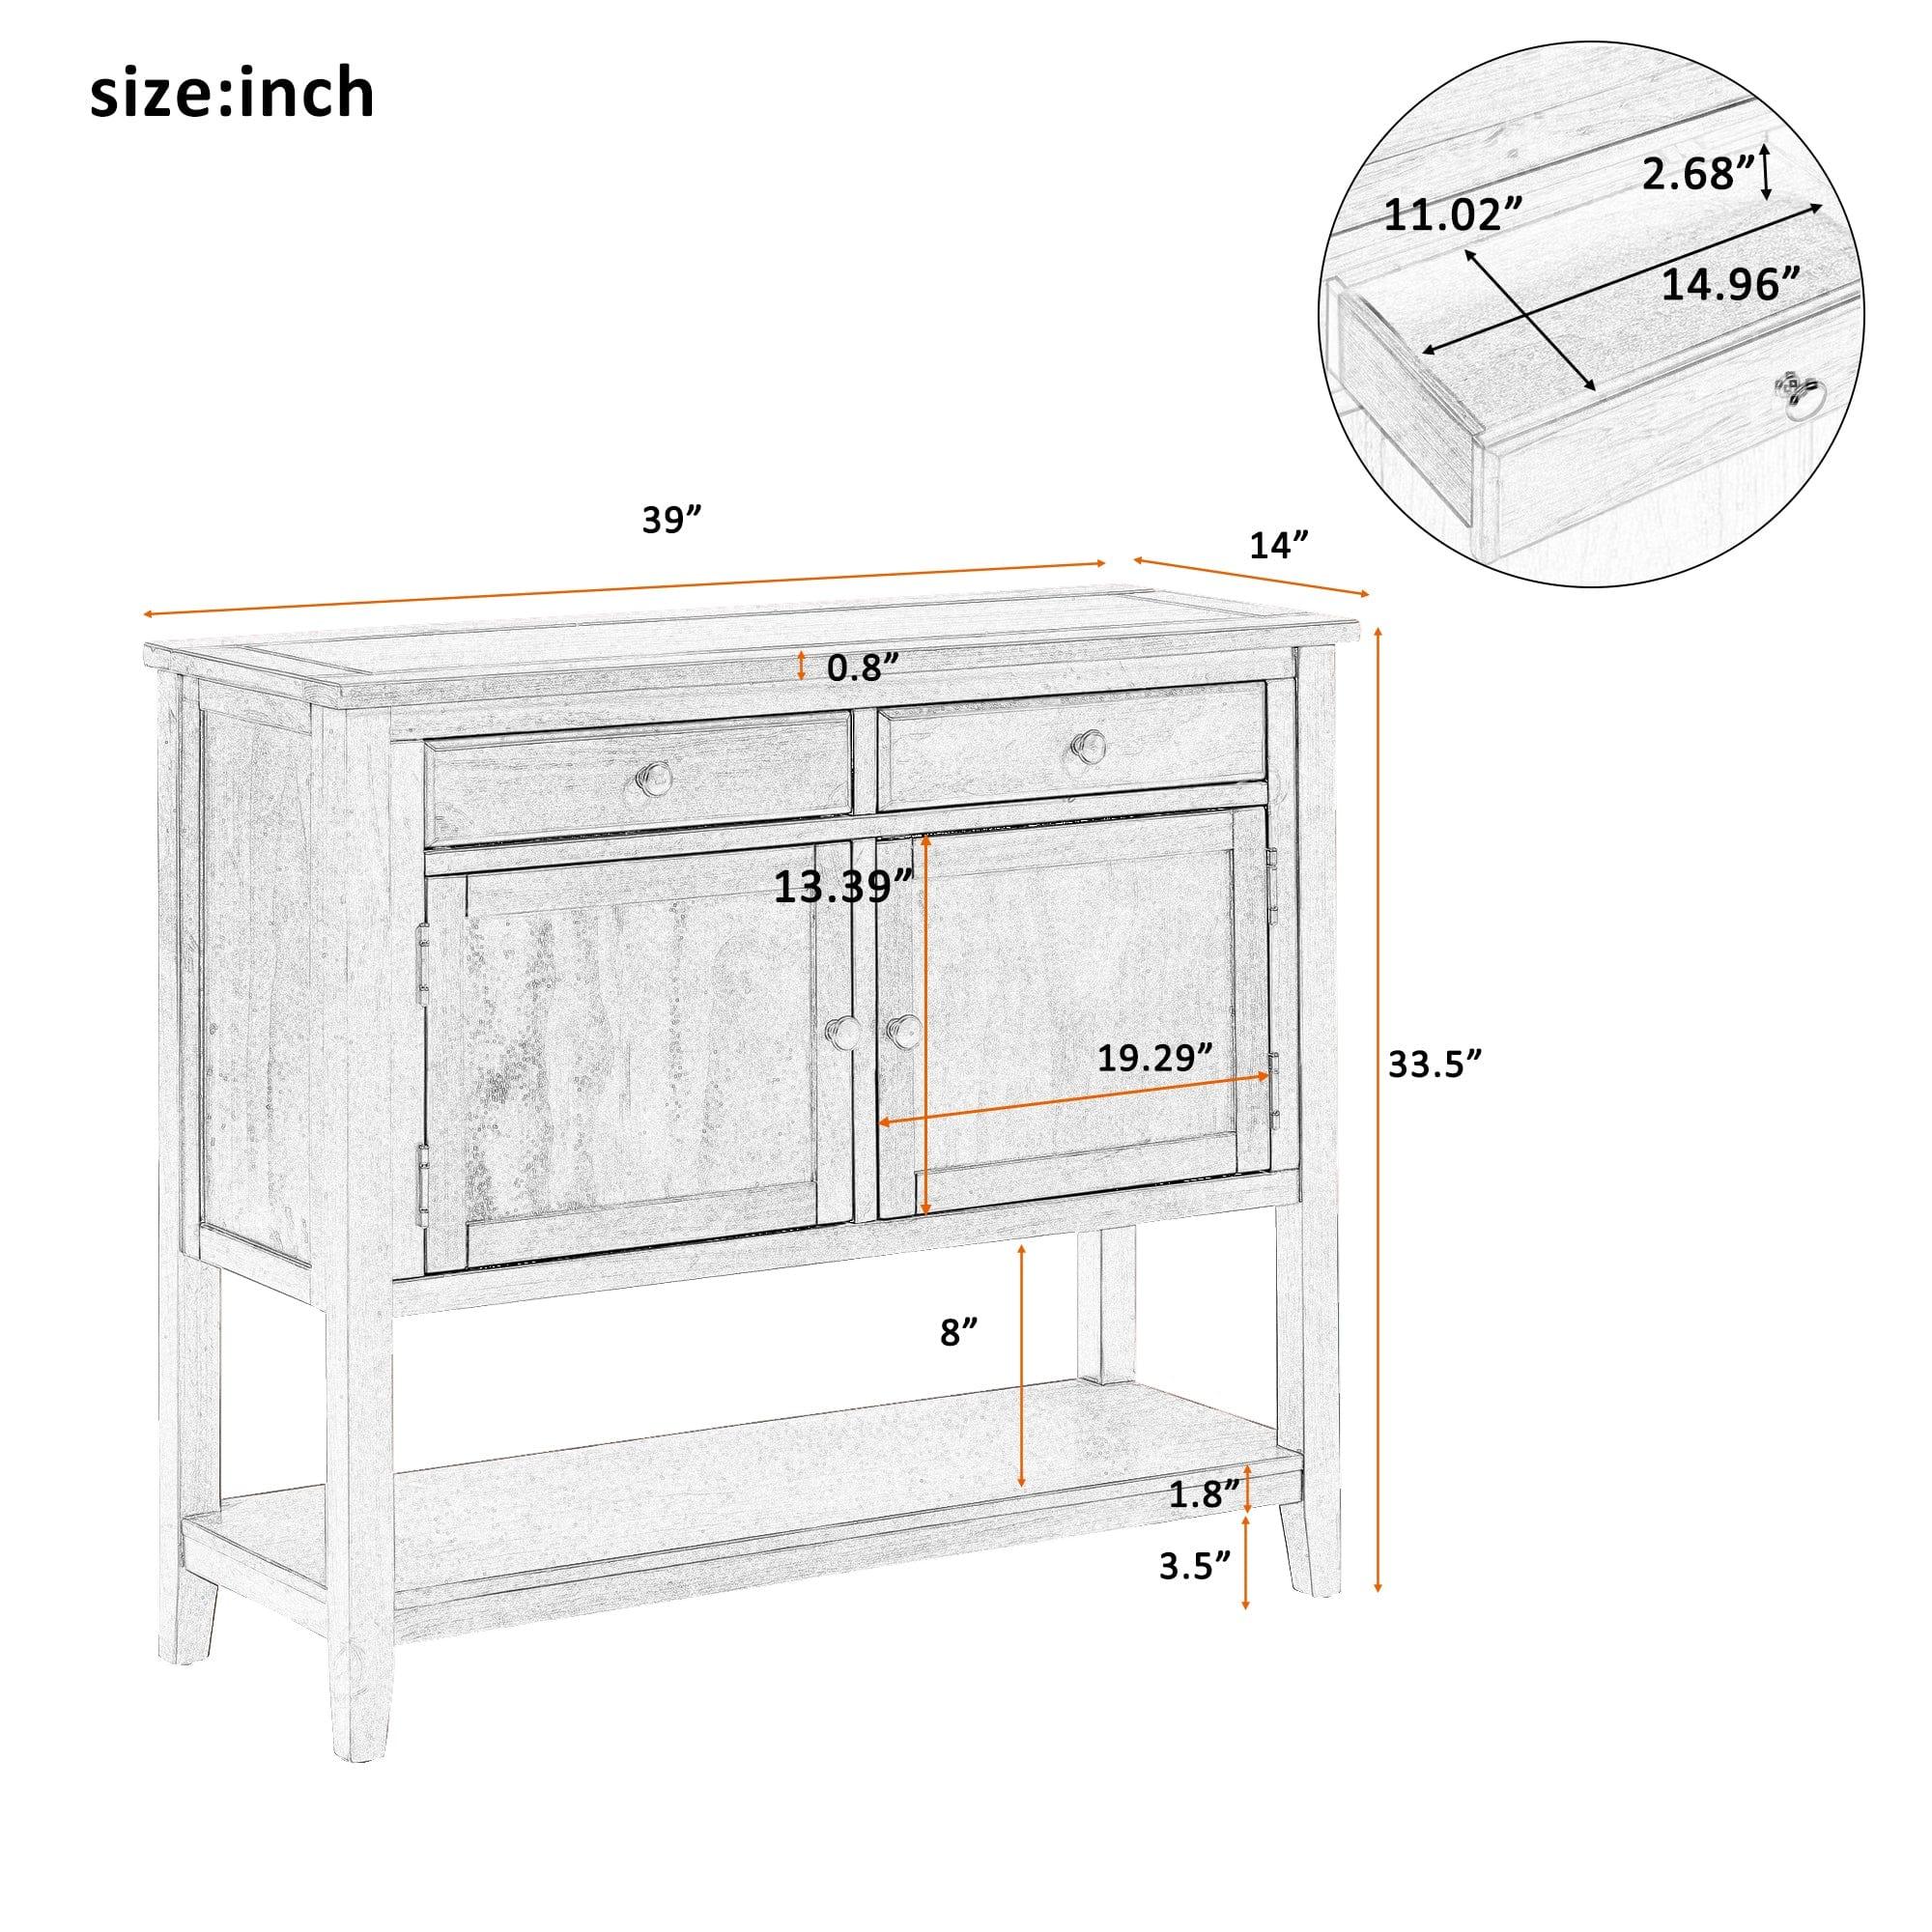 Shop U_STYLE 39'' Modern Console Table Sofa Table for Living Room with 2 Drawers, 2 Cabinets and 1 Shelf Mademoiselle Home Decor